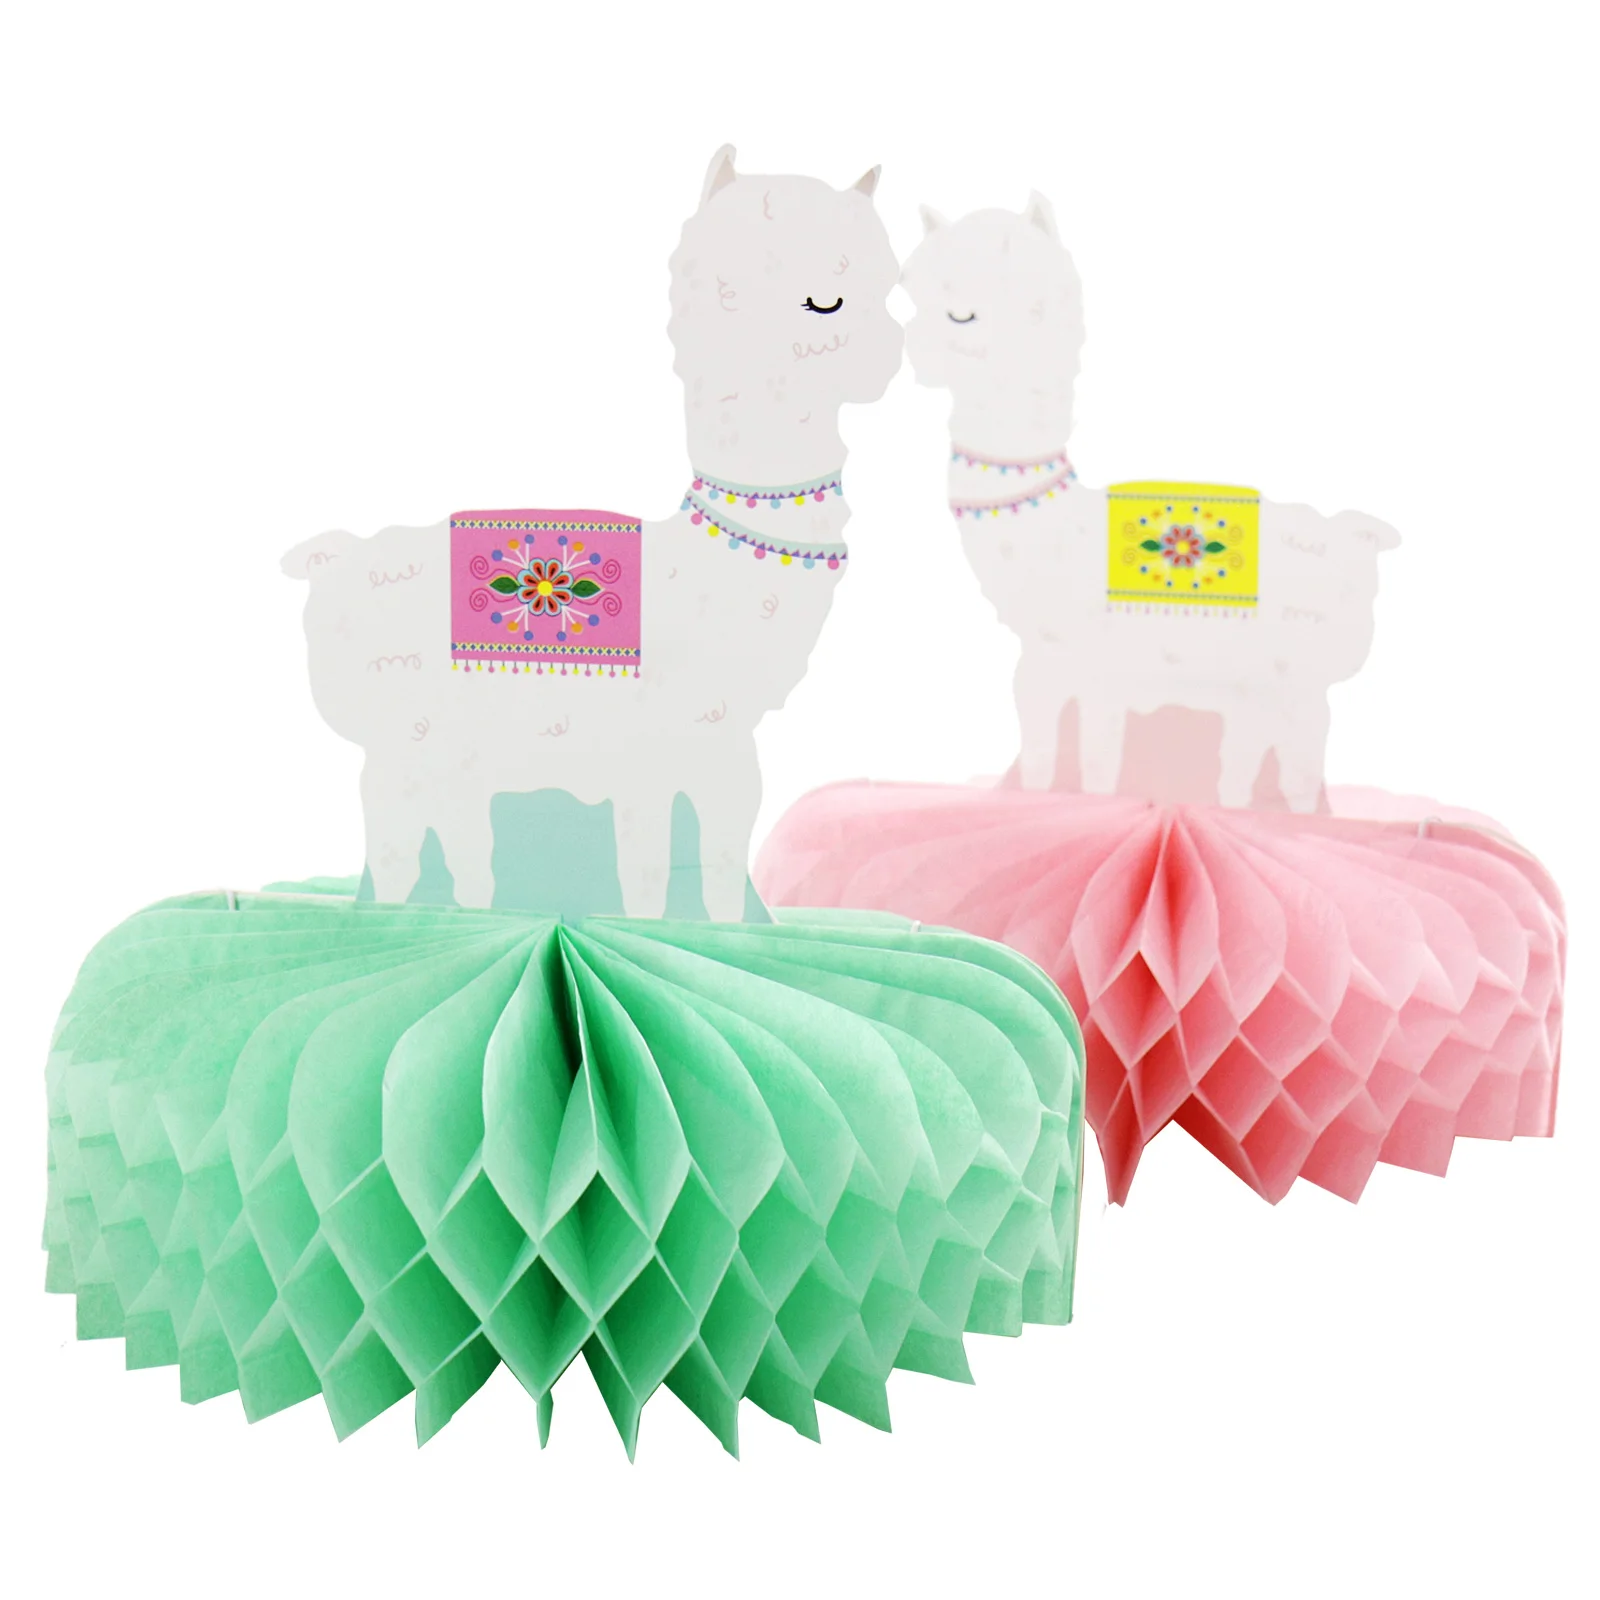 Alpaca tableware Birthday Party Decor Llama Paper Plates Cups Napkins Cake Topper for Kids Happy Birthday Party Decor Supplies